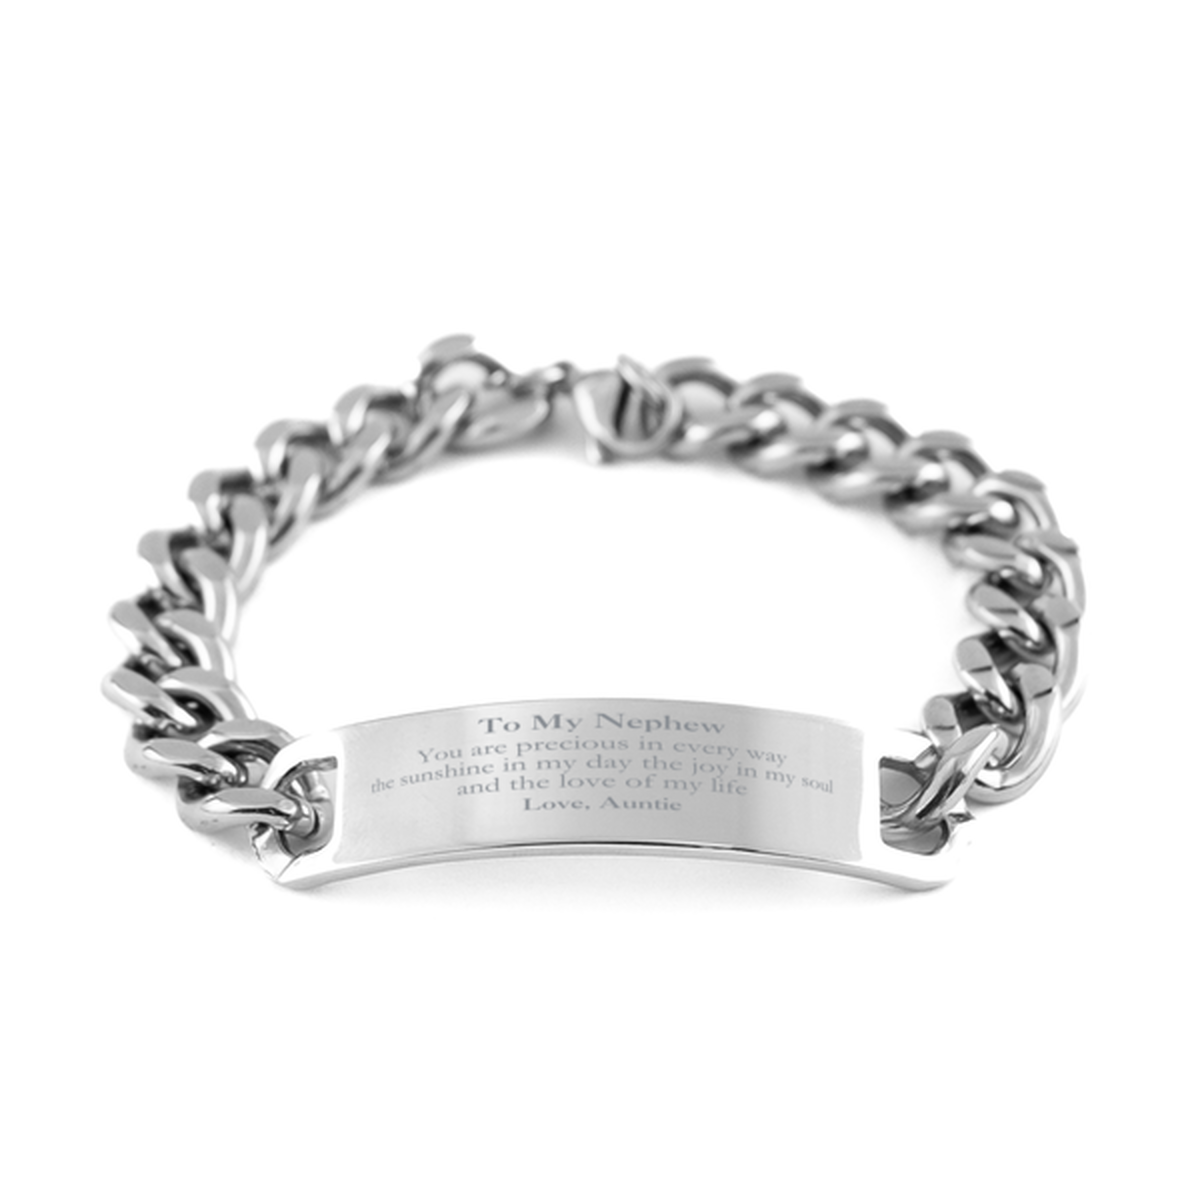 Graduation Gifts for Nephew Cuban Chain Stainless Steel Bracelet Present from Auntie, Christmas Nephew Birthday Gifts Nephew You are precious in every way the sunshine in my day. Love, Auntie